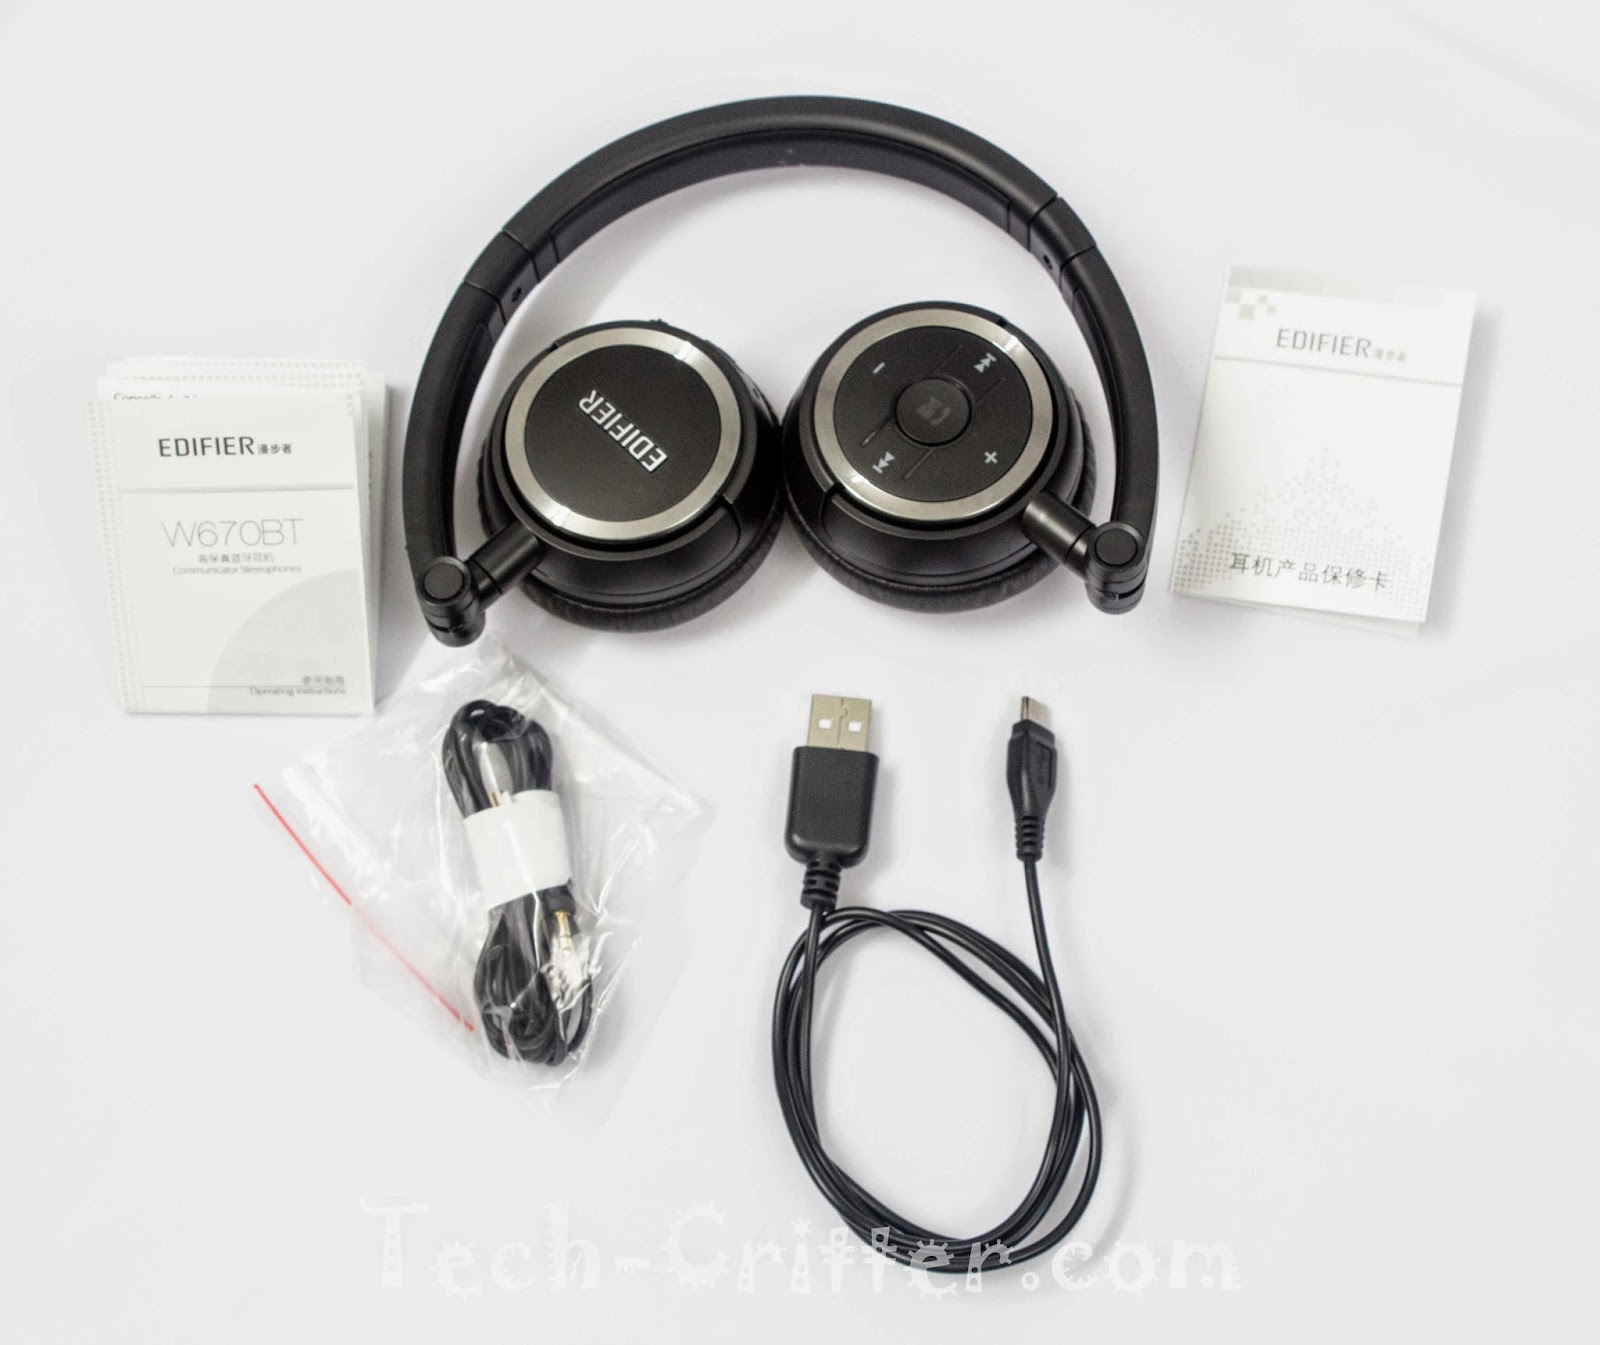 Unboxing & Review: Edifier W670BT Stereo Bluetooth Headset 39